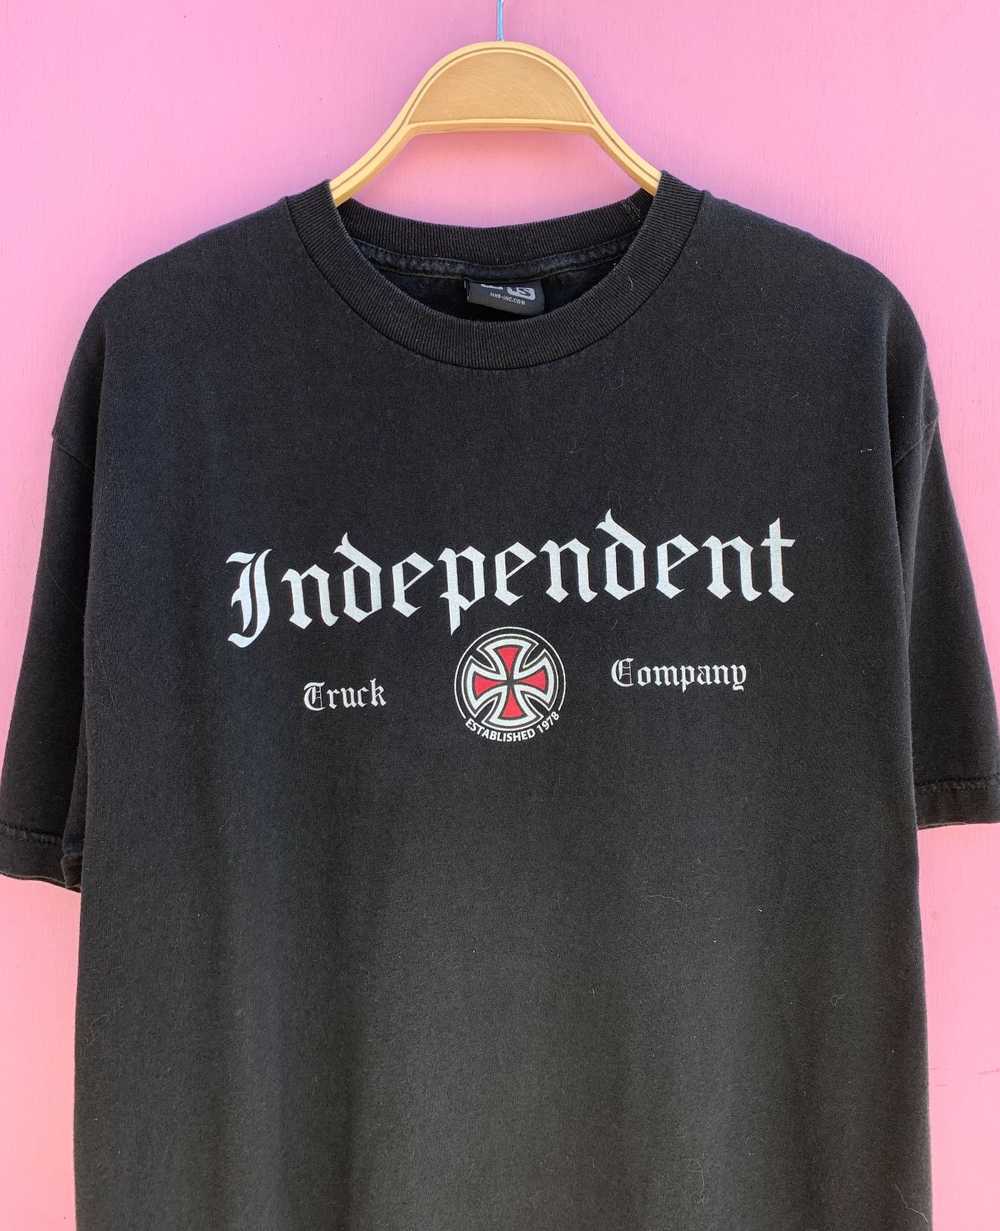 INDEPENDENT SKATE TRUCK COMPANY T-SHIRT - image 2